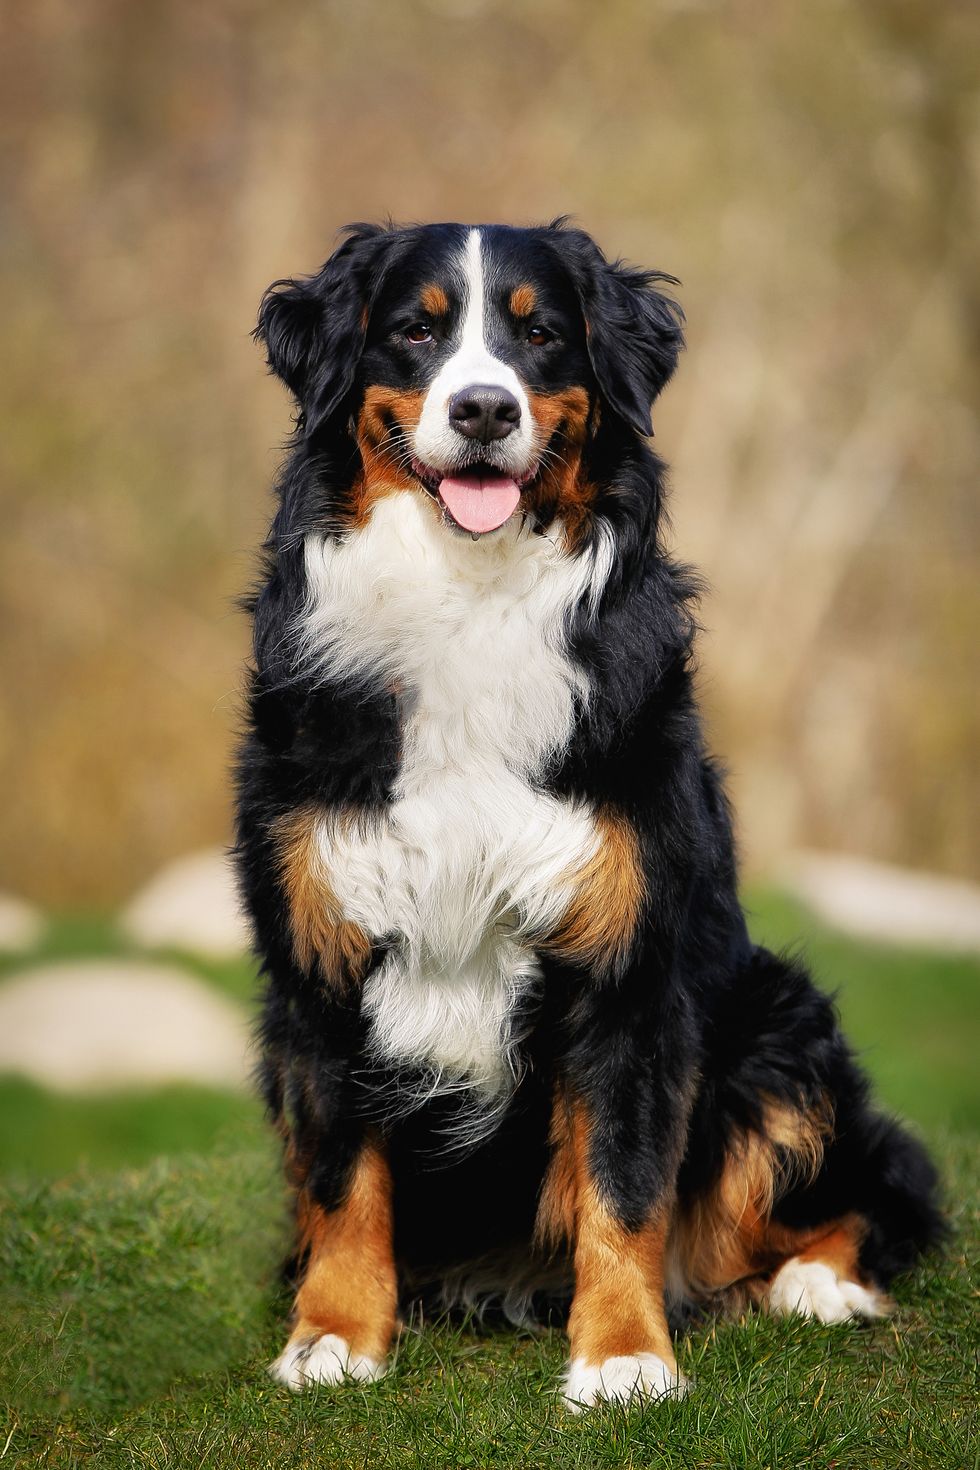 https://hips.hearstapps.com/hmg-prod/images/bernese-mountain-dog-royalty-free-image-1581013857.jpg?crop=0.87845xw:1xh;center,top&resize=980:*